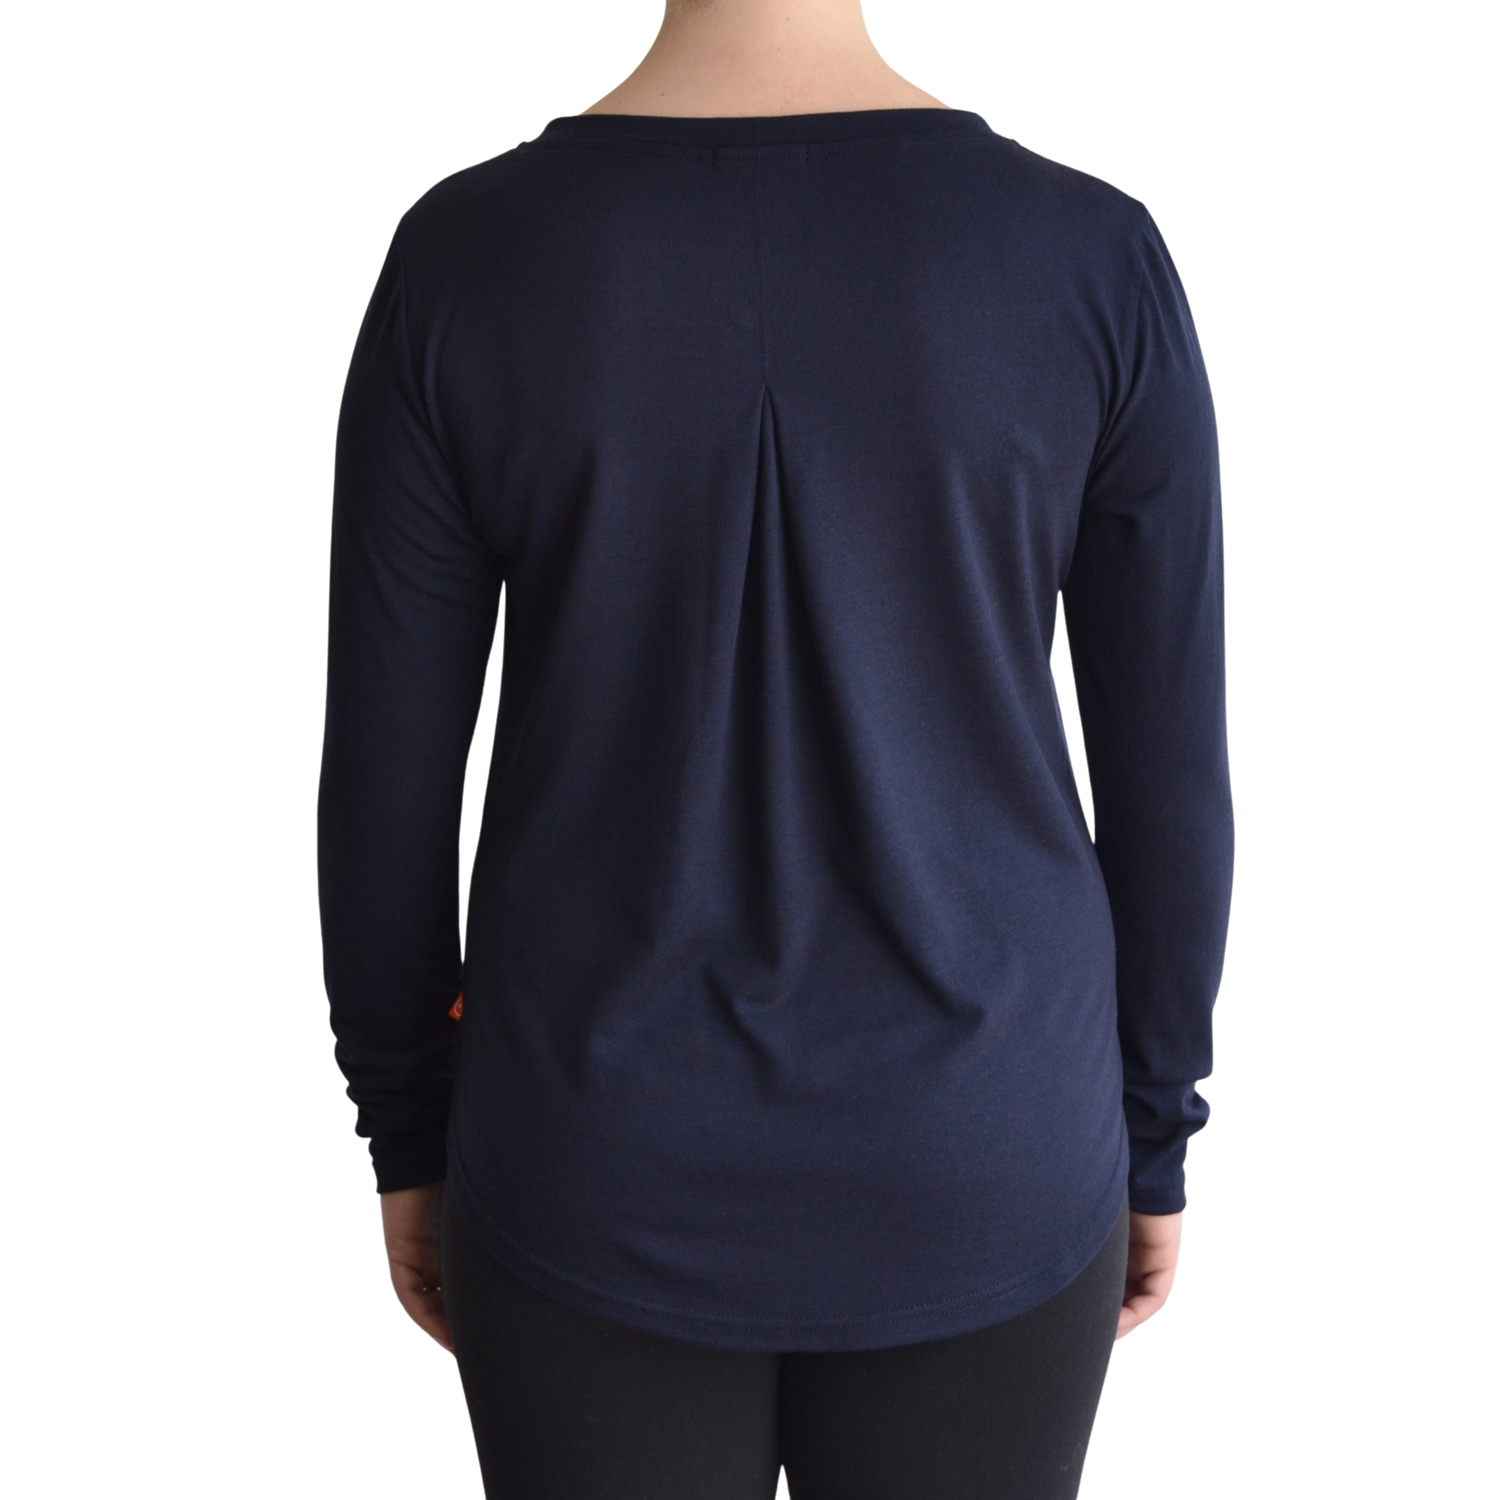 Links long sleeve merino top in navy blue colour, model faces away so the back is showing front on with a box pleat and scooped hemline. 